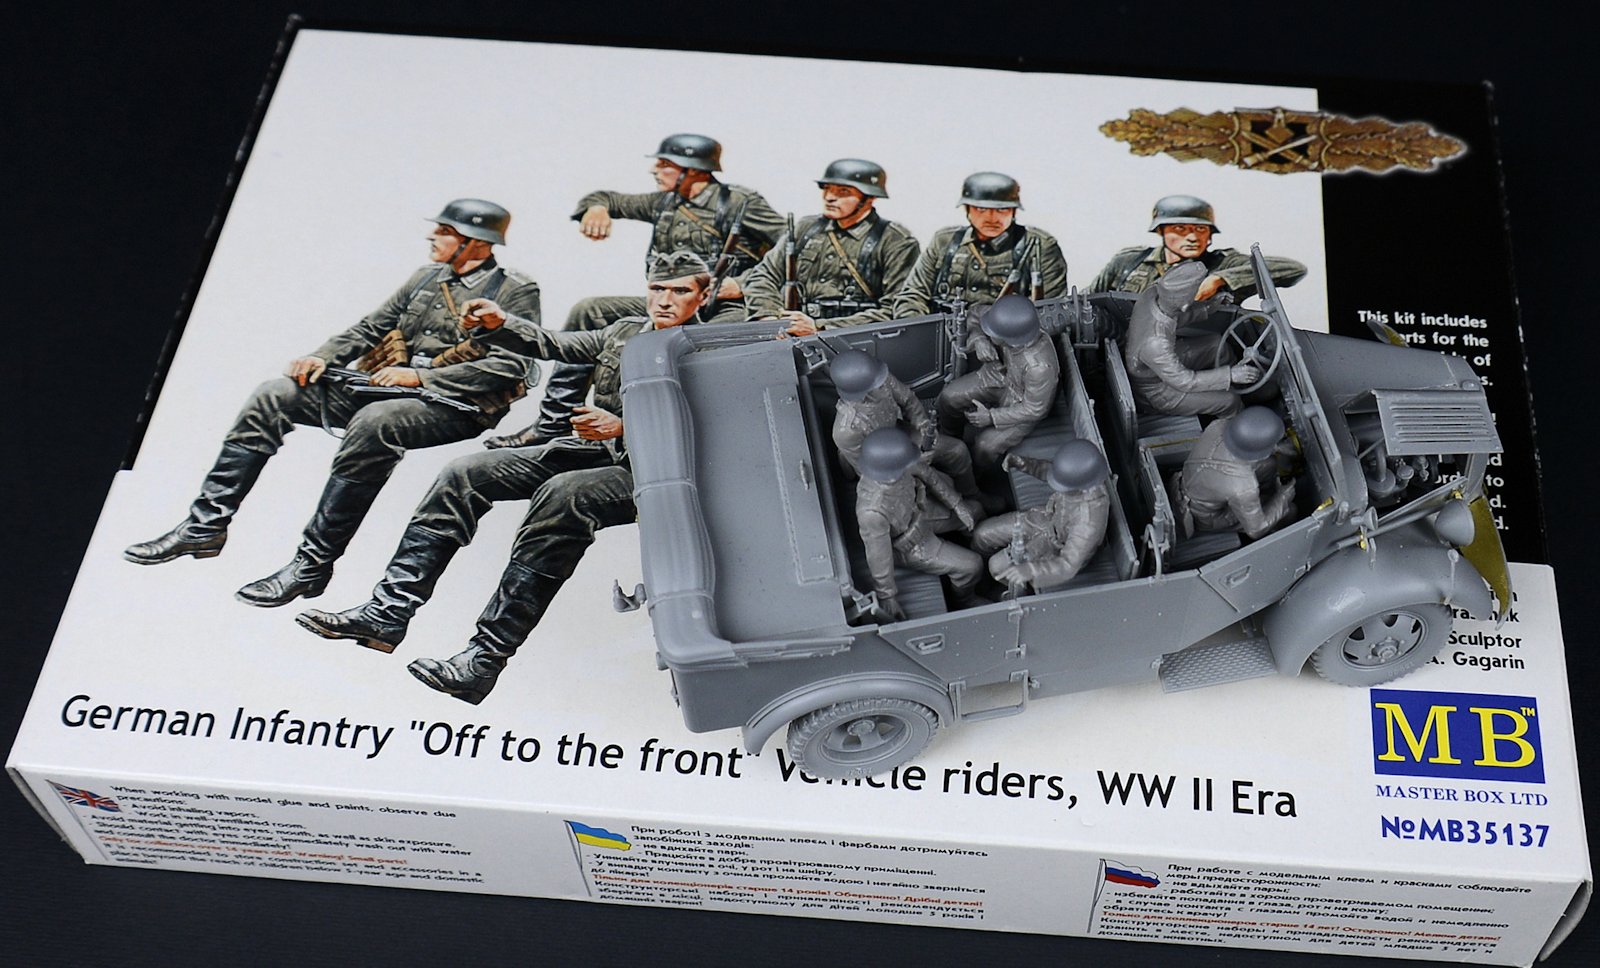 Master Box 35137 "Off to the front" WWII German Infantry Vehicle Riders kit 1/35 